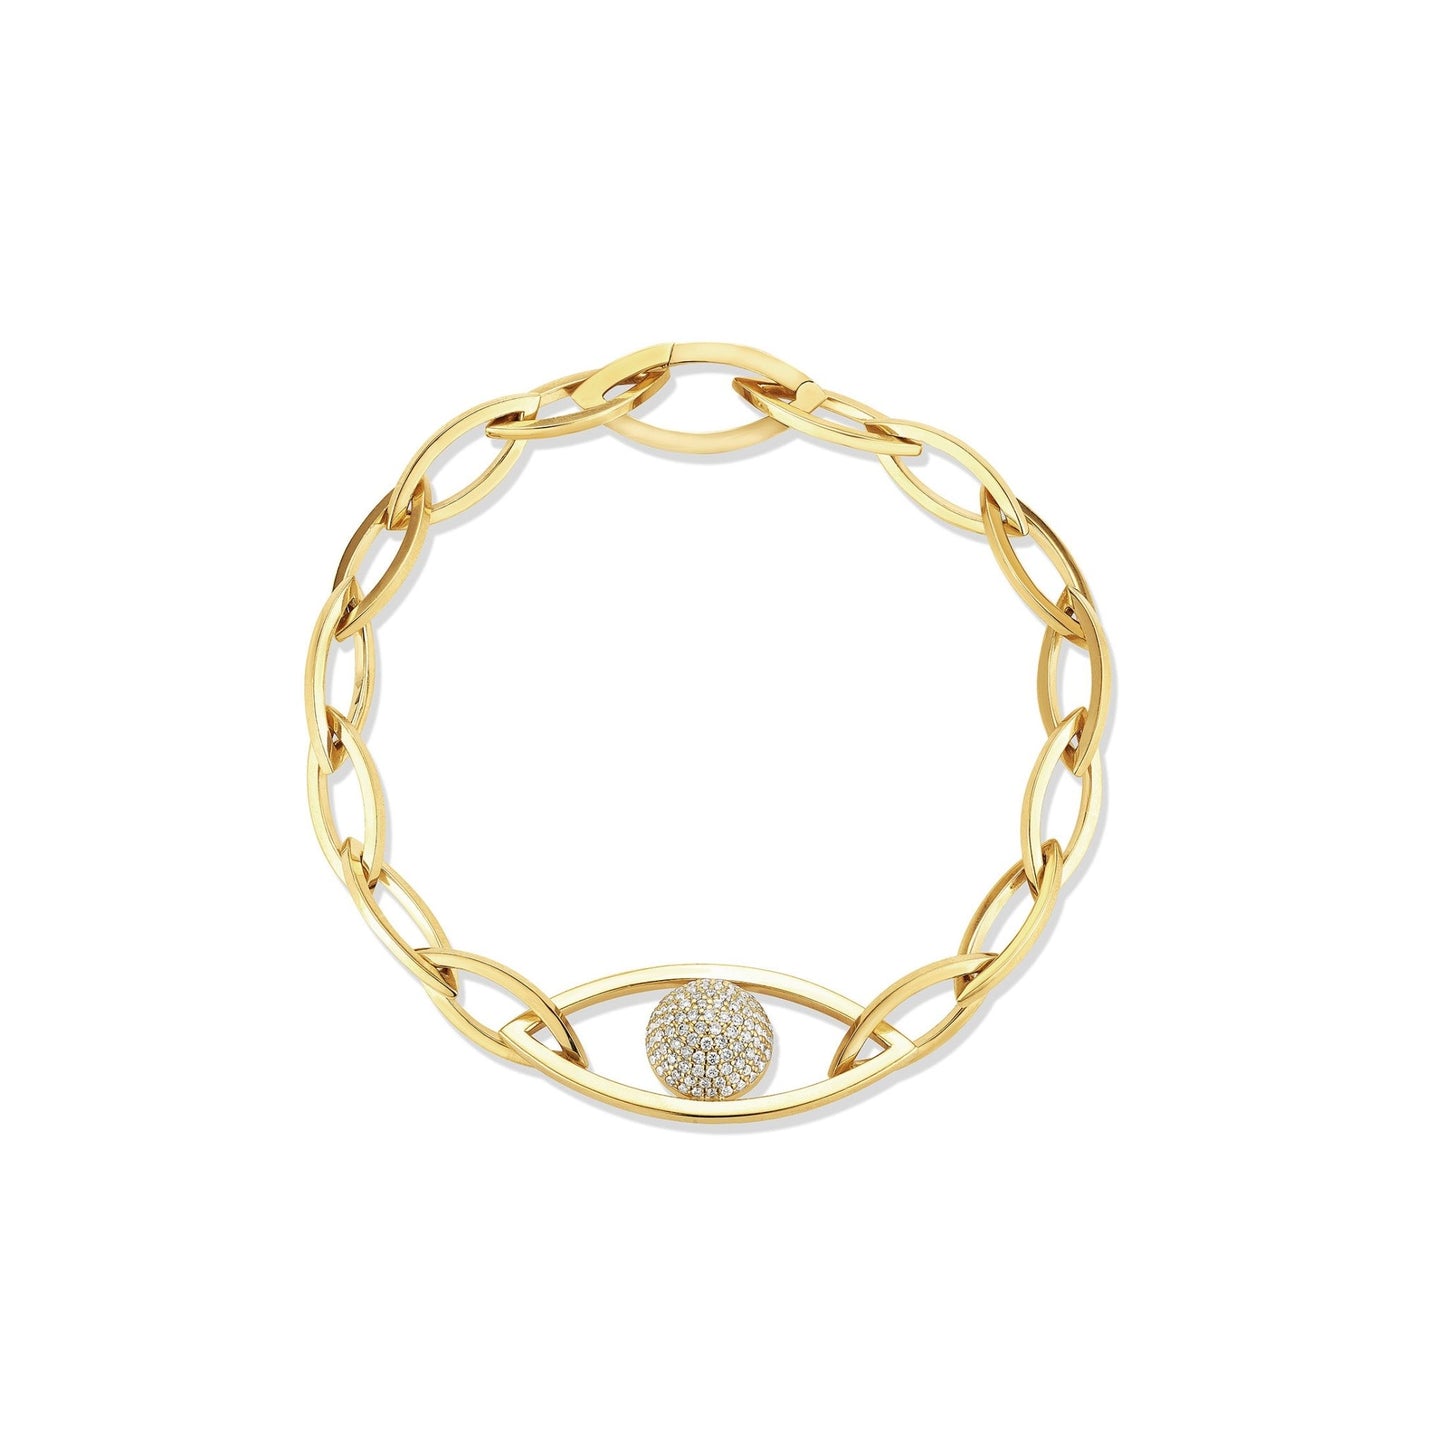 Yellow Gold Reflections Link Bracelet with White Pave Diamonds - CADAR